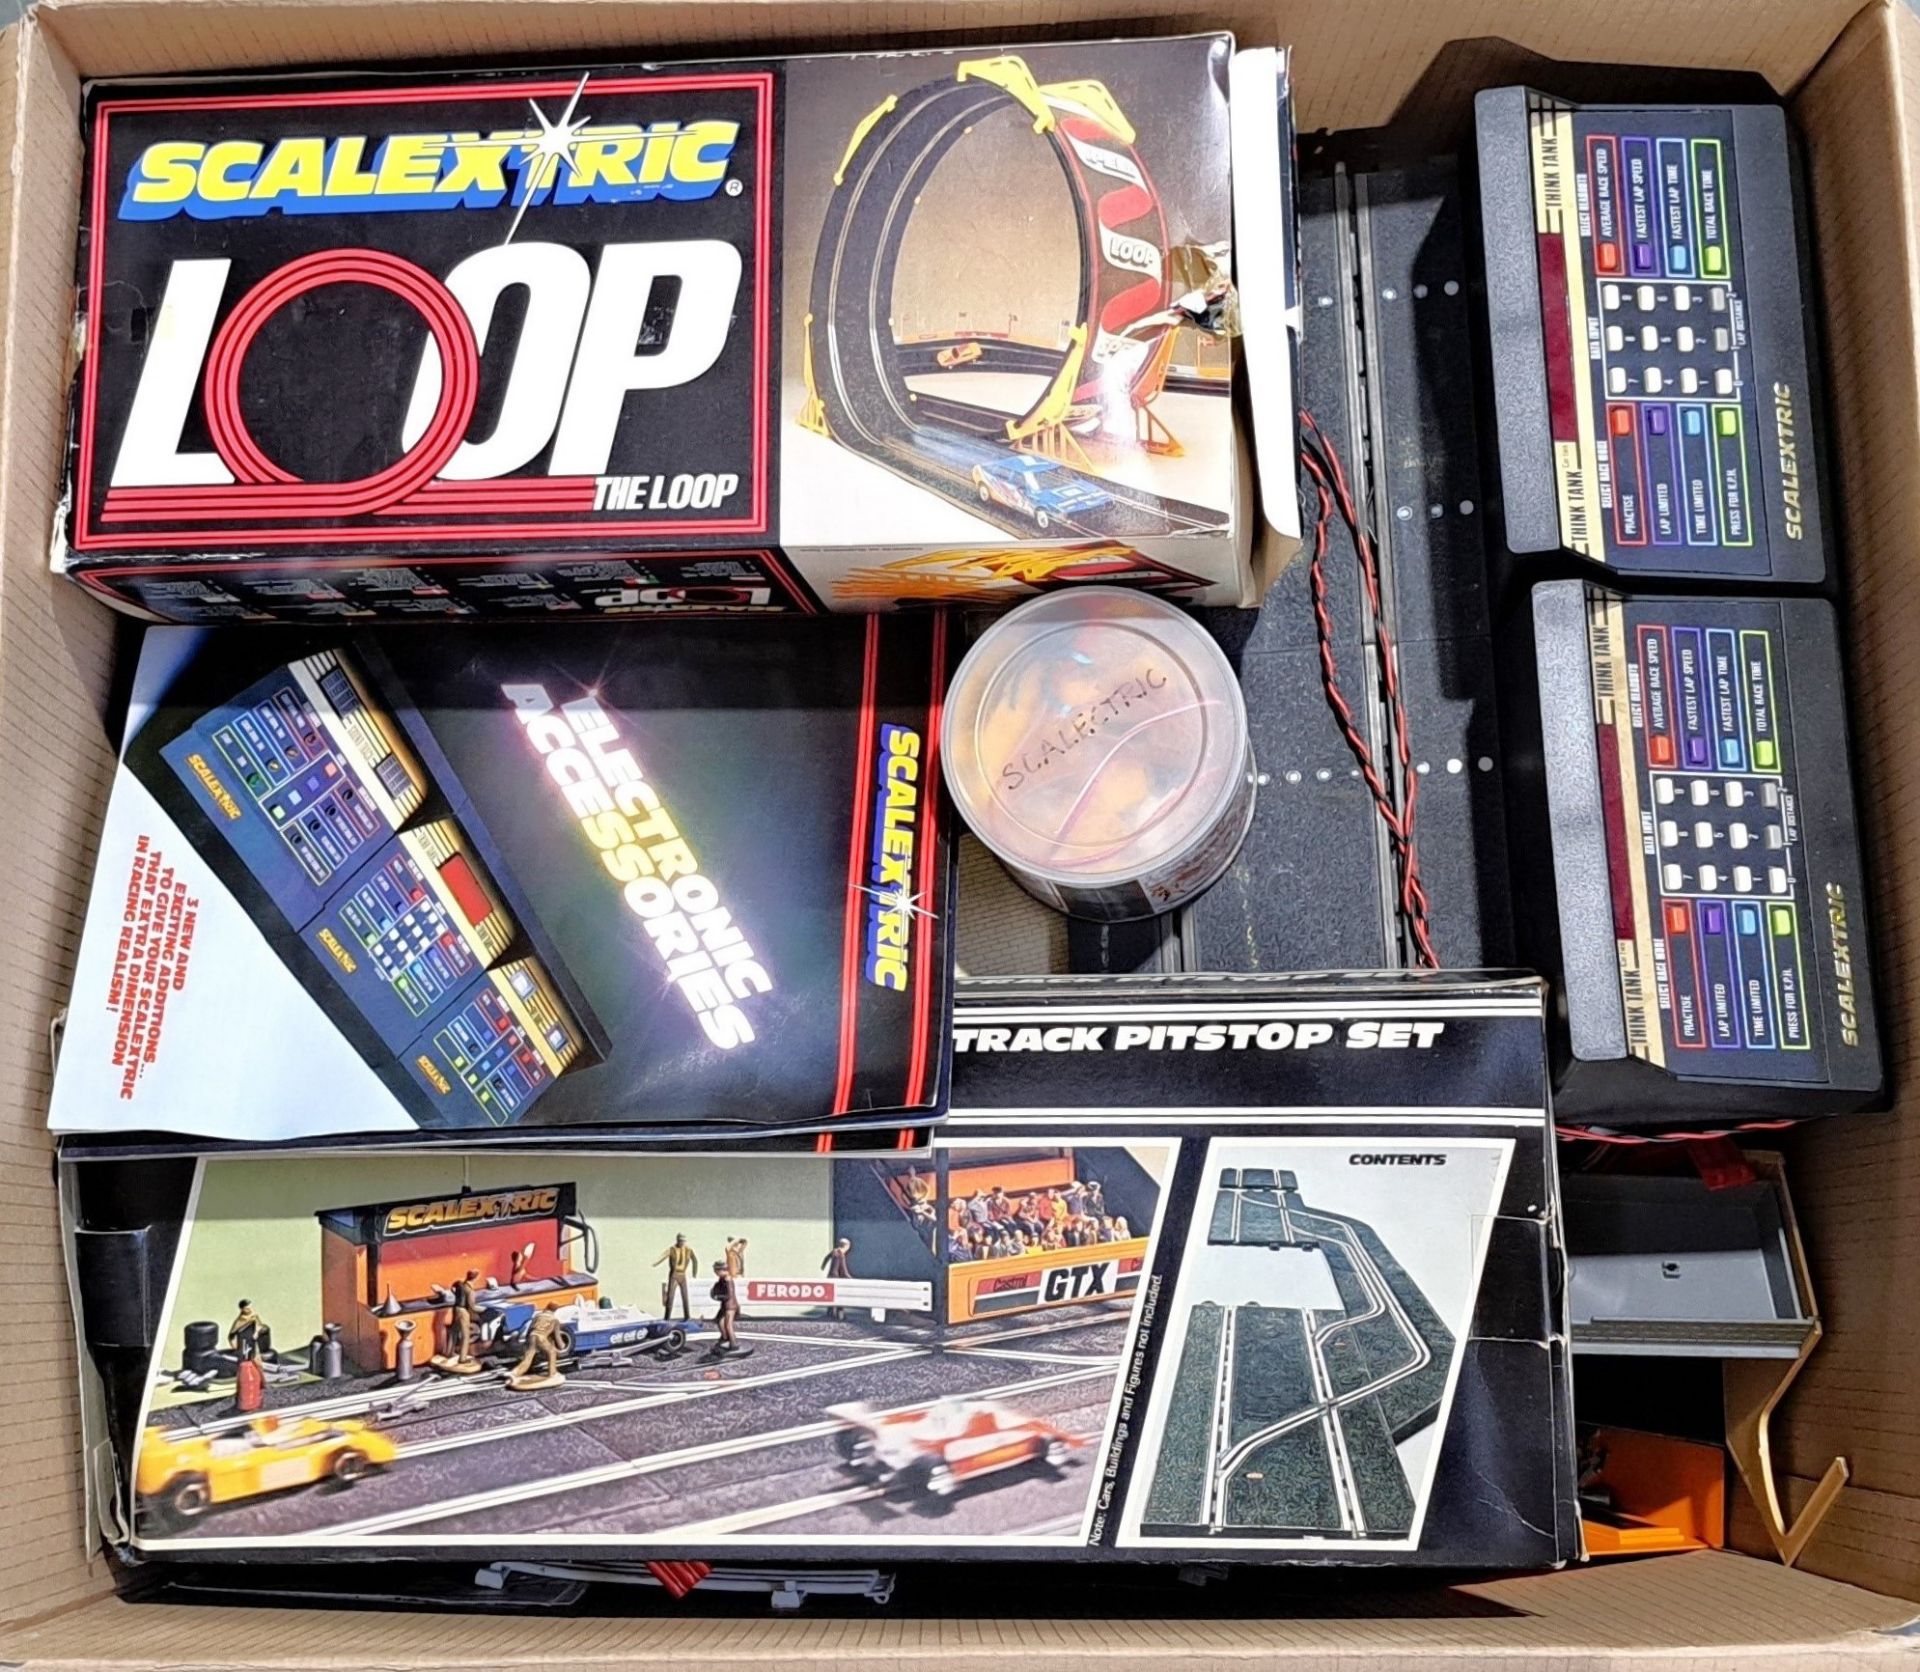 Scalextric accessories, controllers, track & similar, a large boxed & unboxed group - Image 2 of 2